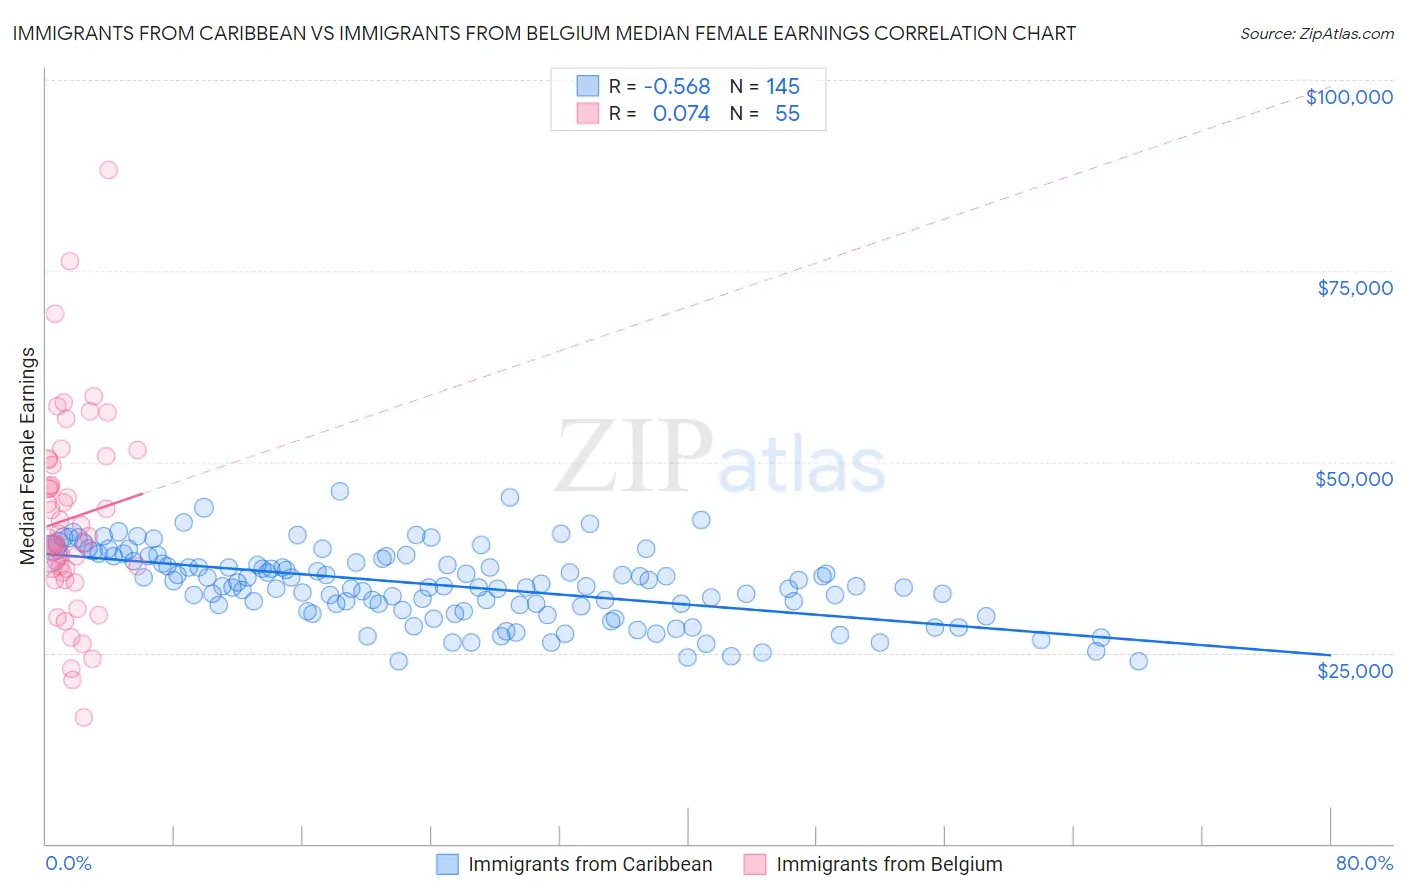 Immigrants from Caribbean vs Immigrants from Belgium Median Female Earnings